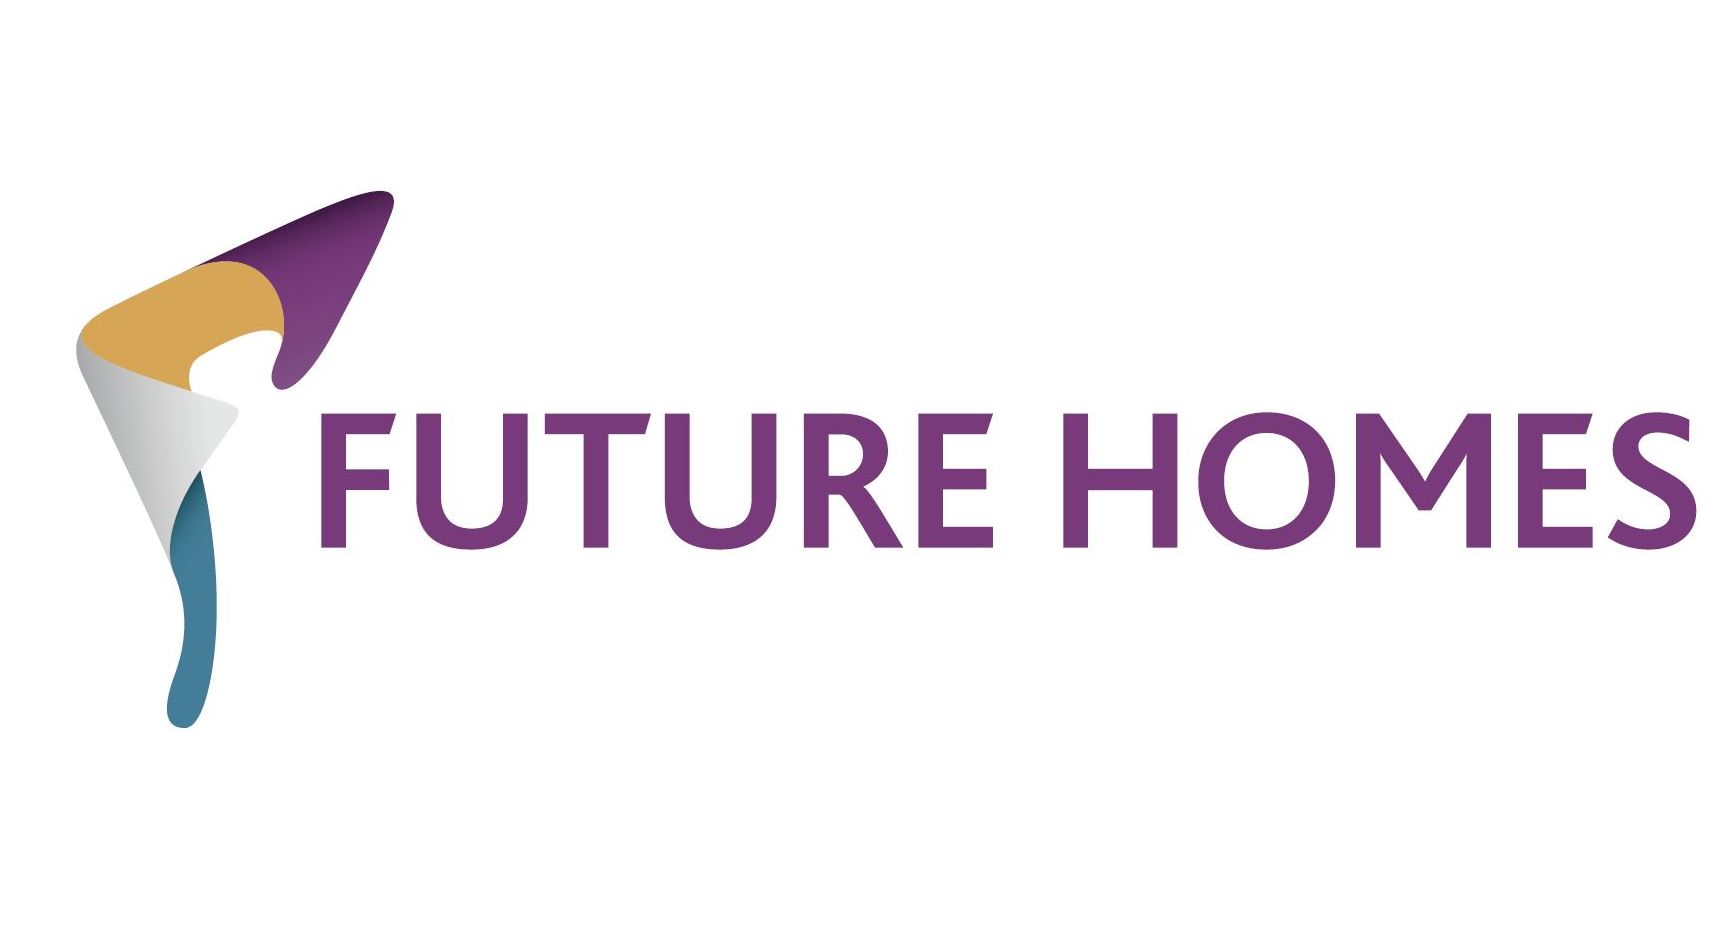 We would like to welcome Future Homes UK to ContactBuilder